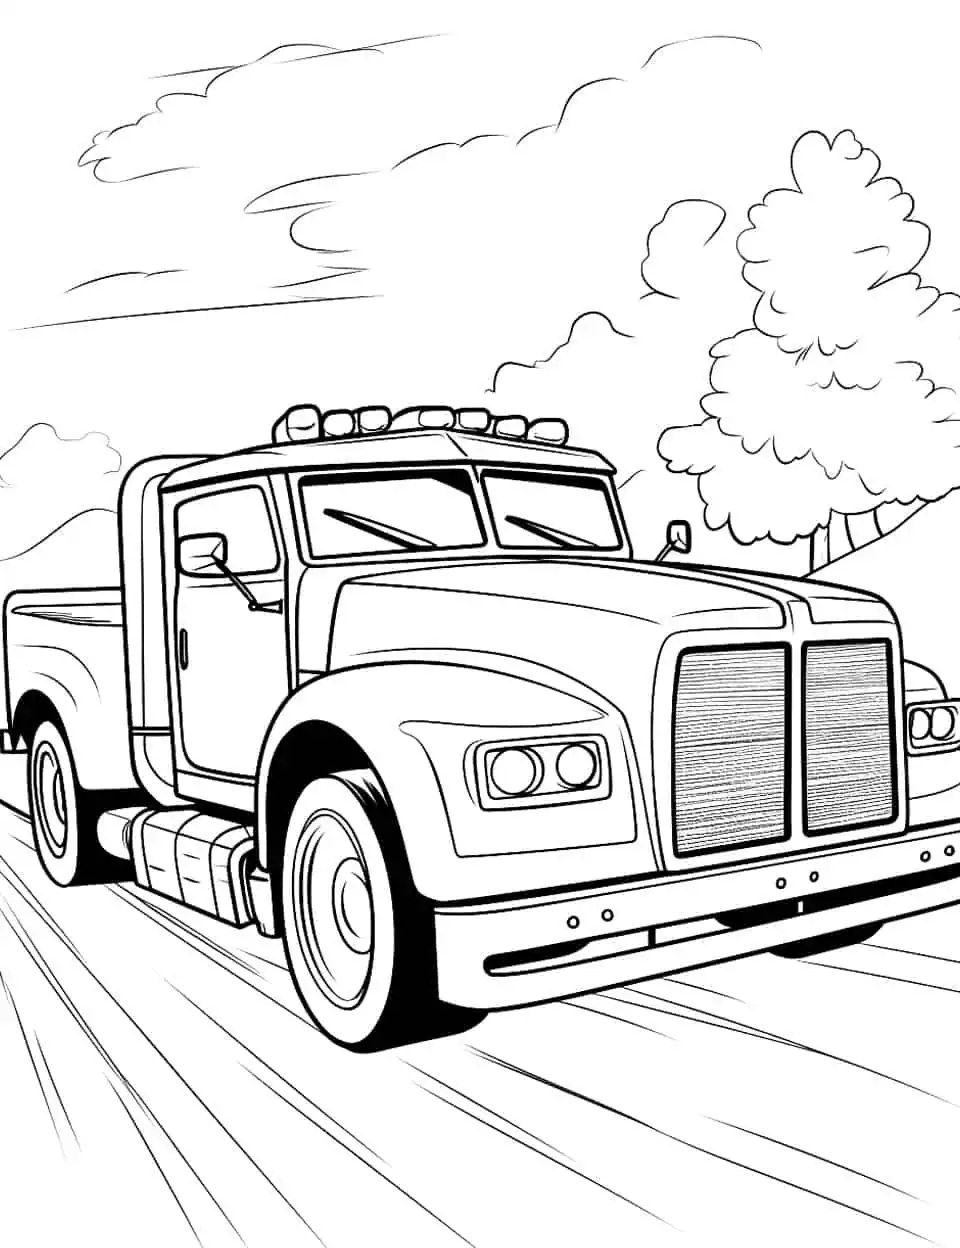 The Big Rig Car Coloring Page - A big, heavy-duty truck for kids who like big vehicles.